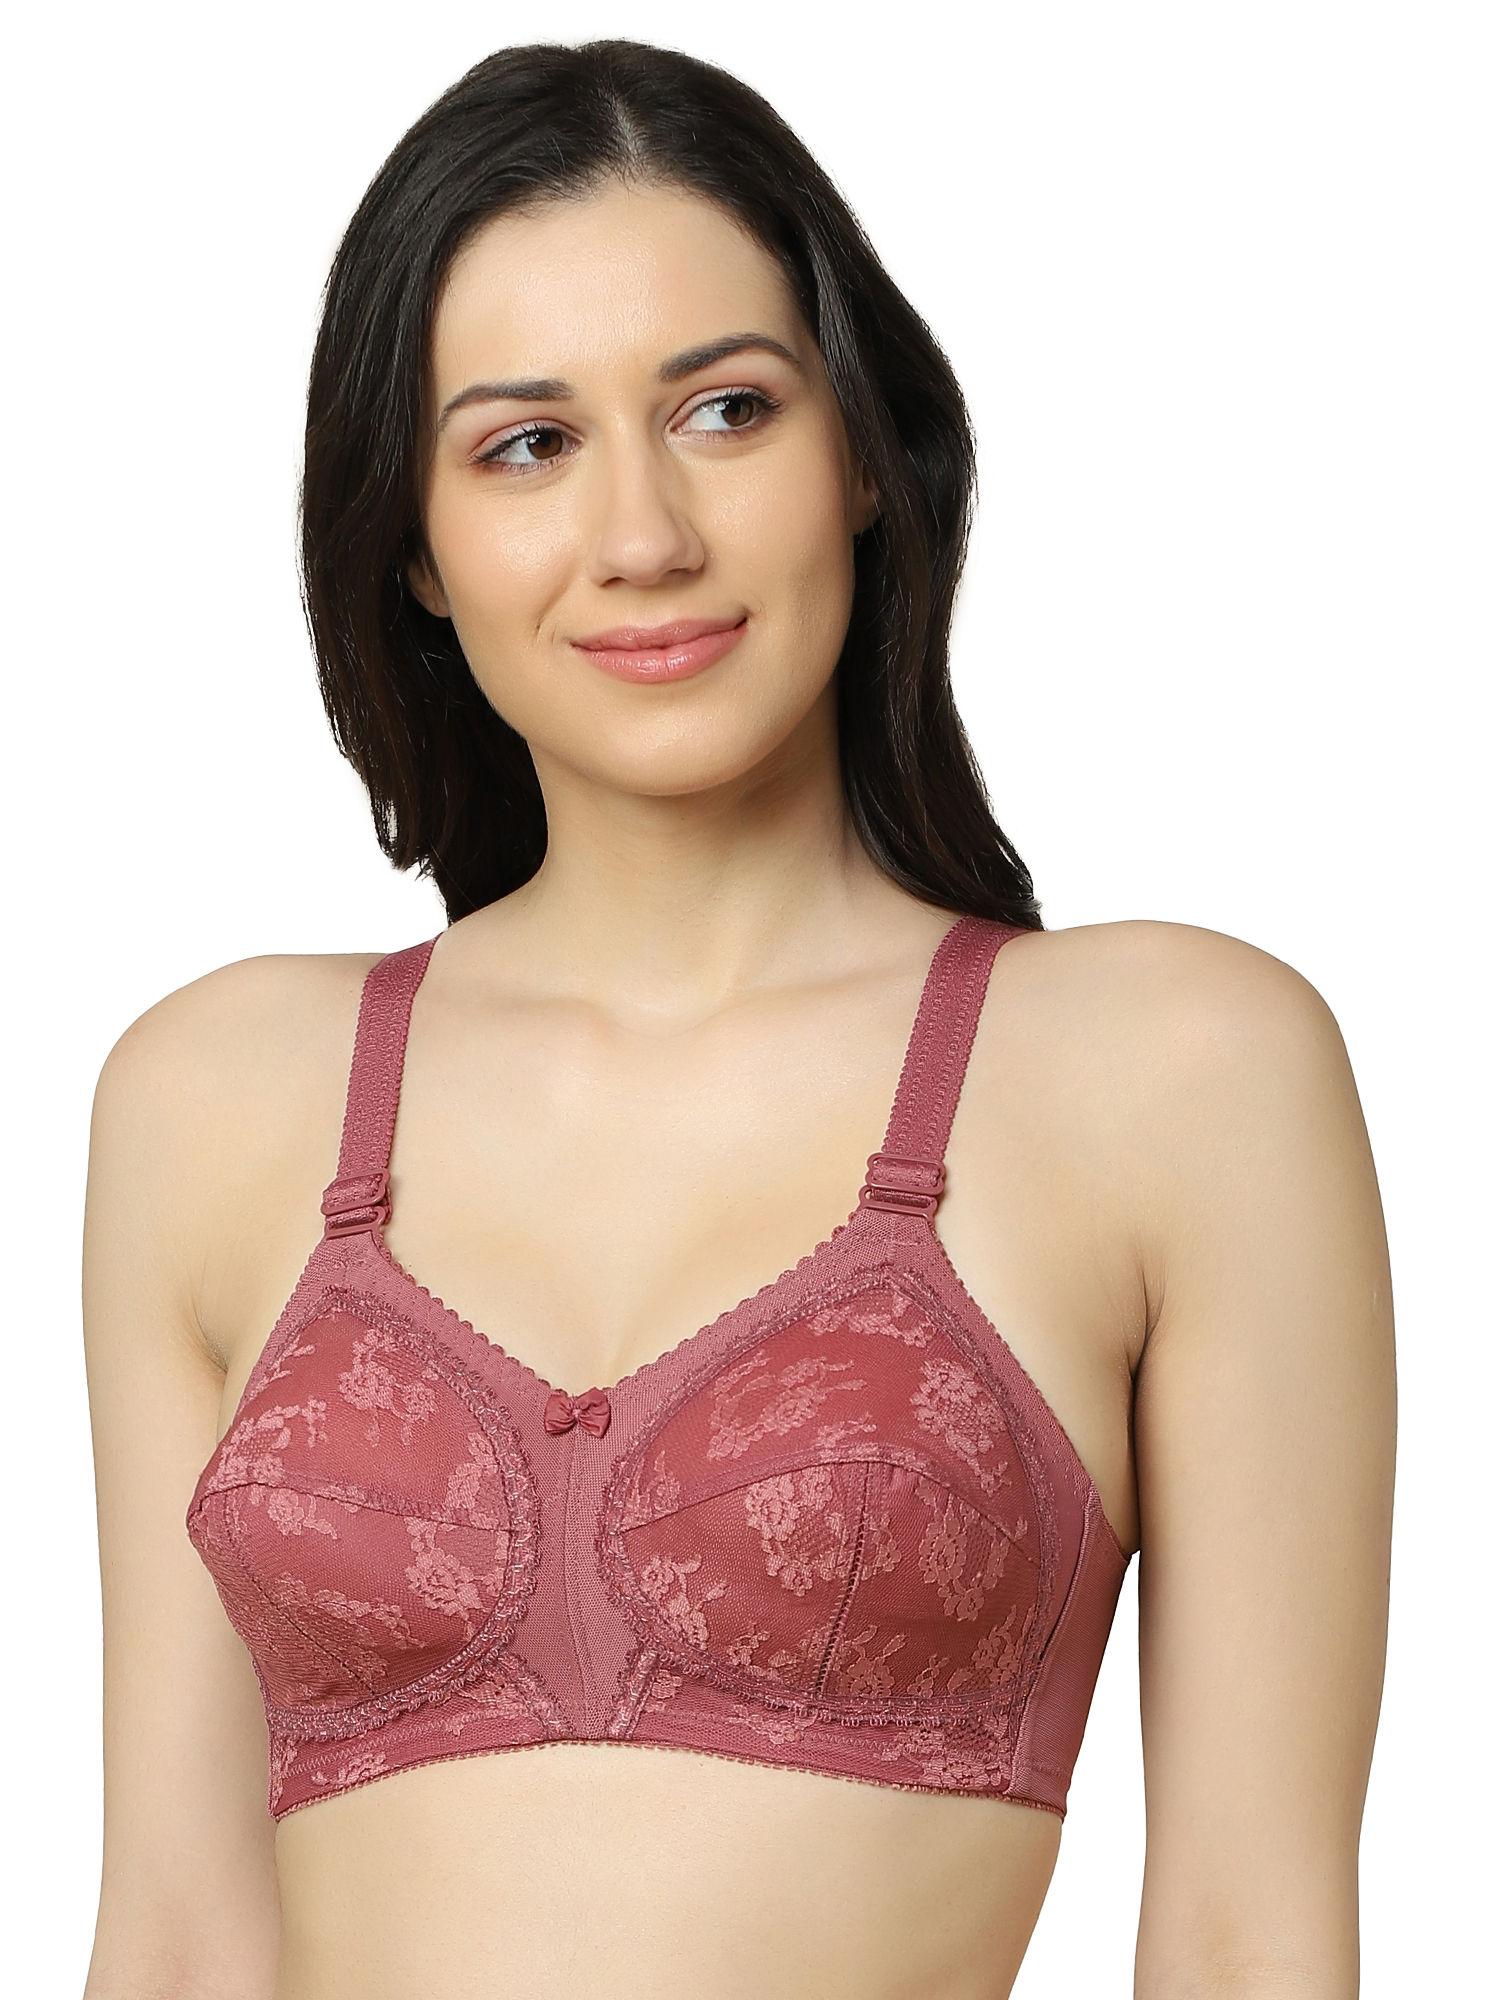 doreen non-wired non-padded full coverage everyday bra - maroon